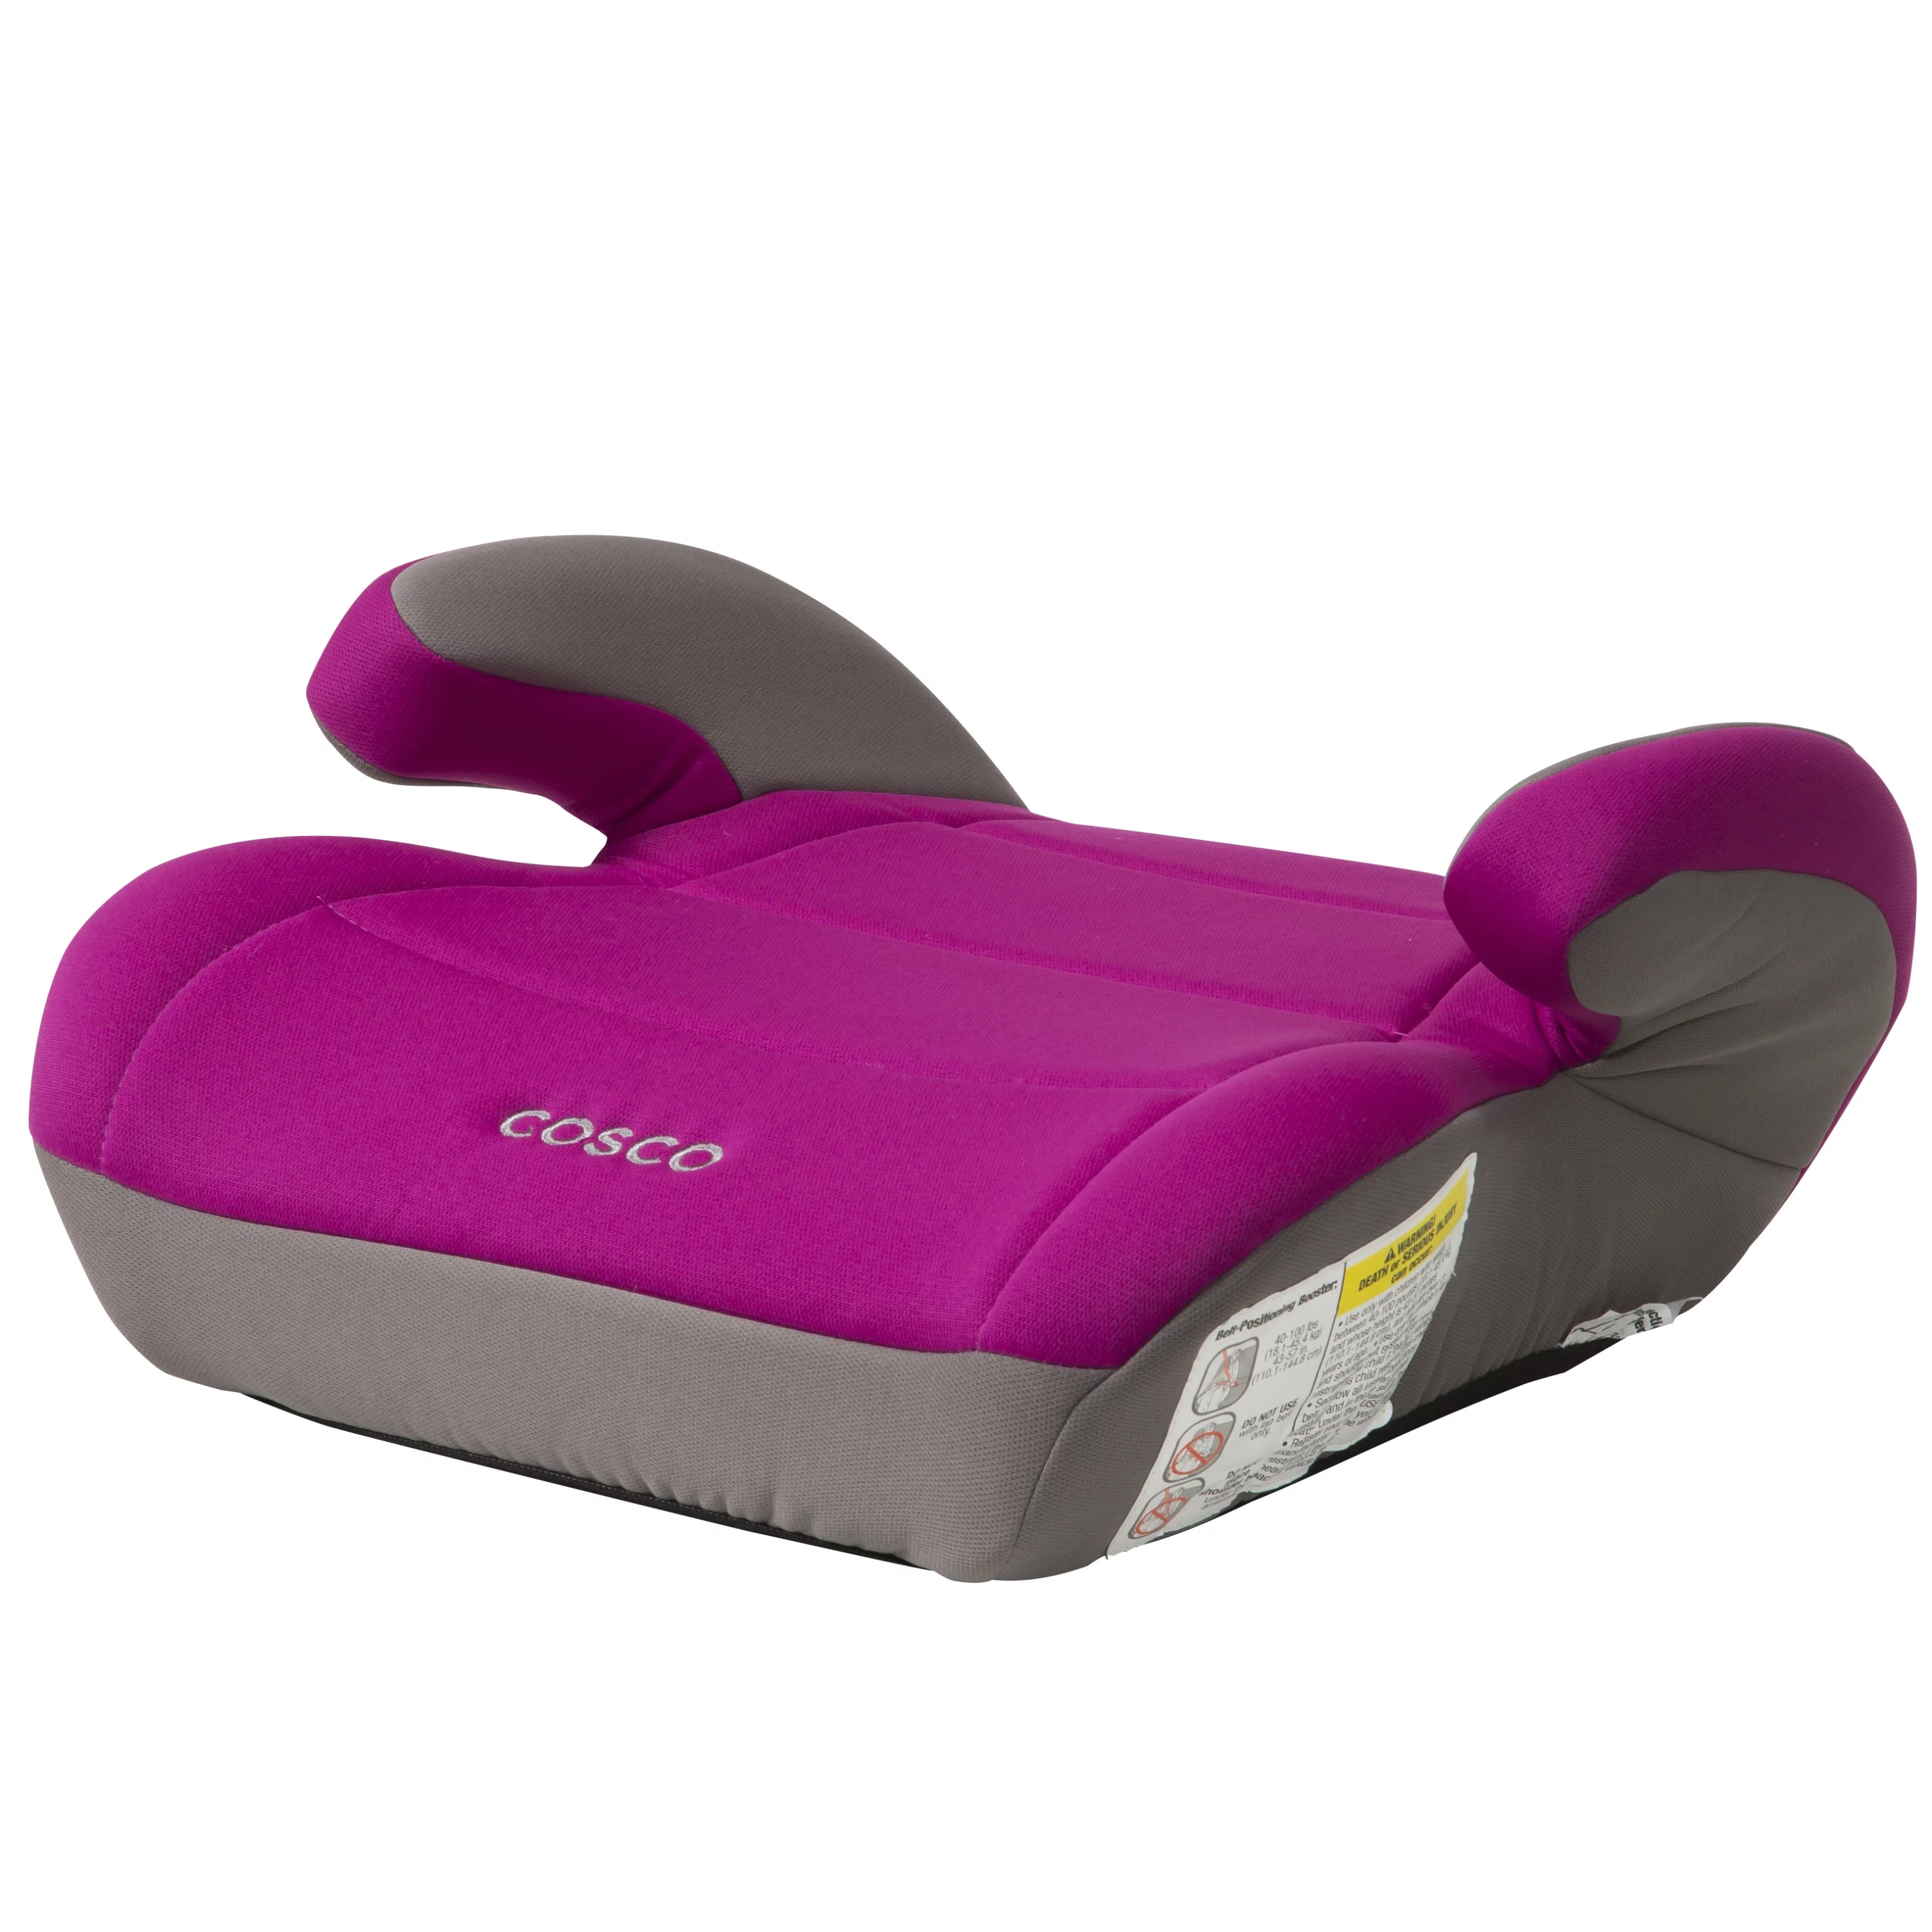 Cosco Topside Booster Car Seat, Magenta